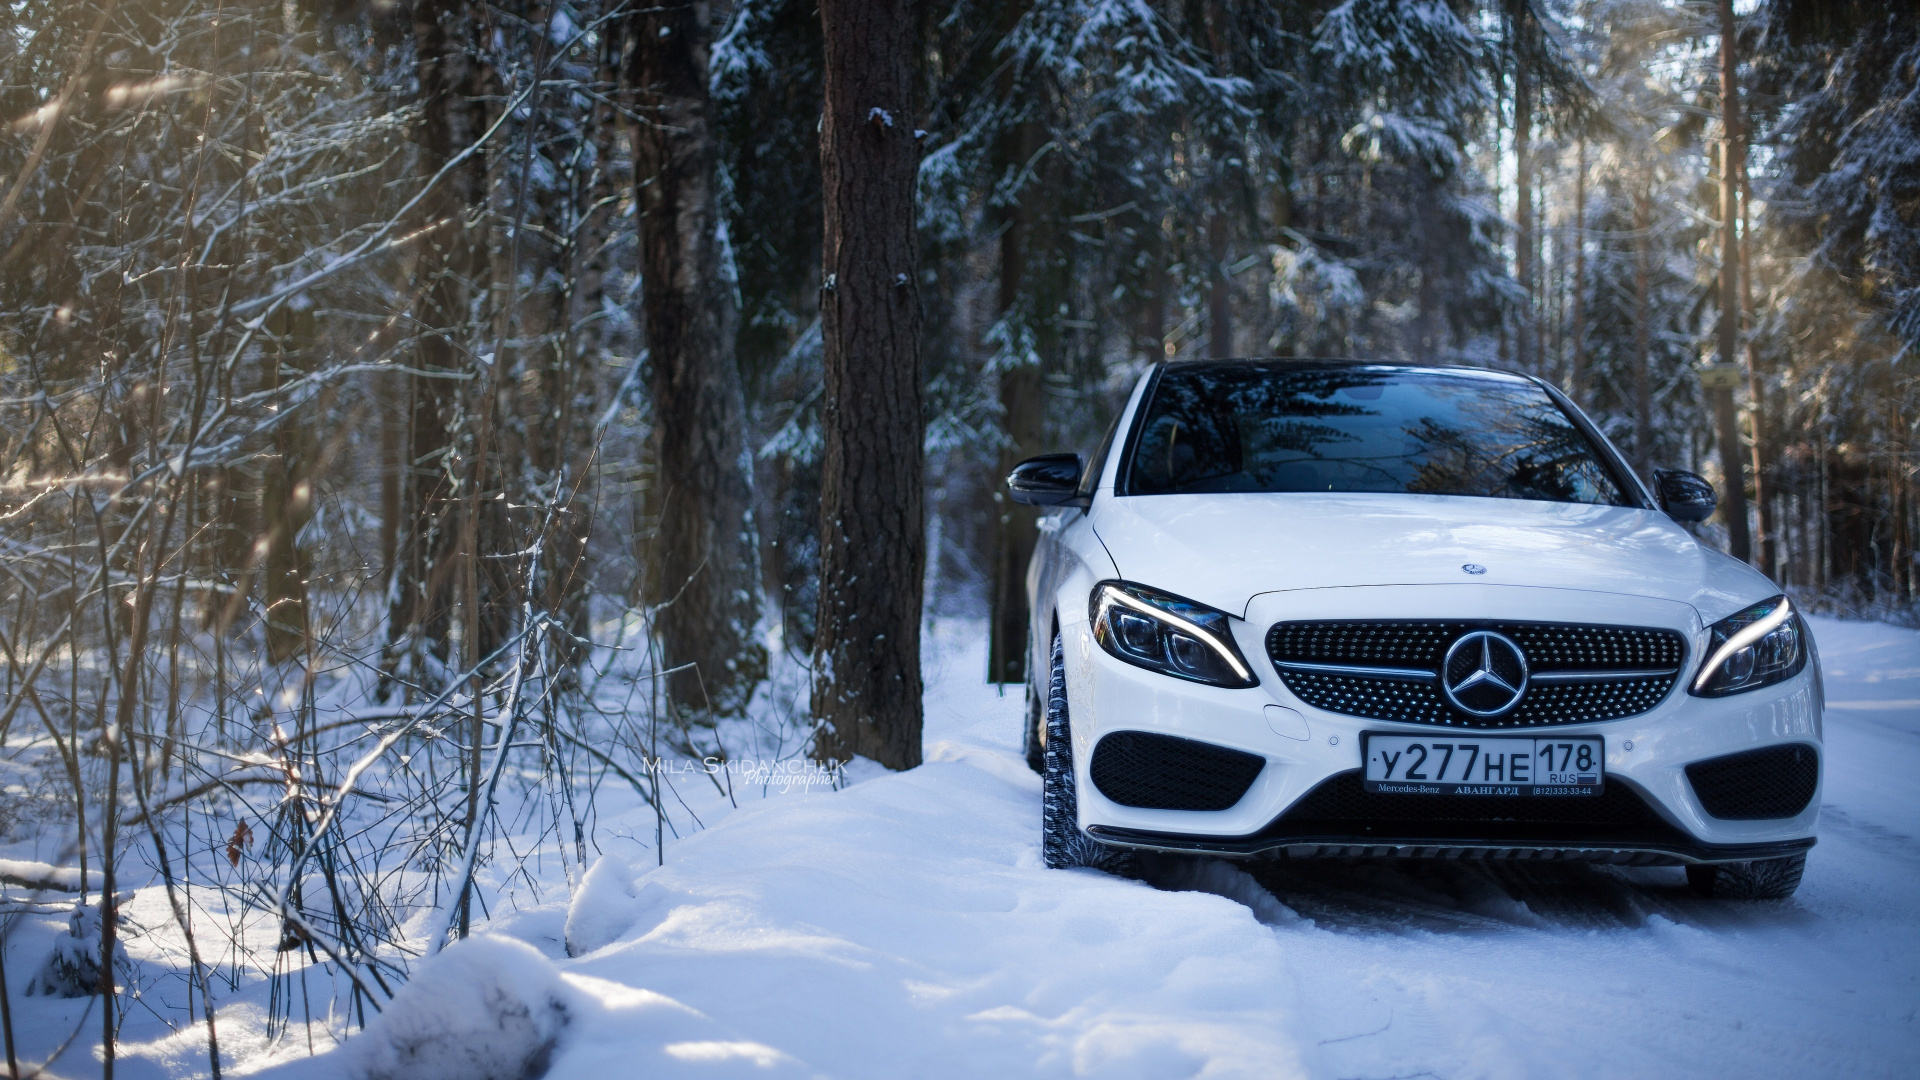 White Mercedes Benz Car on Snow Covered Ground. Wallpaper in 1920x1080 Resolution